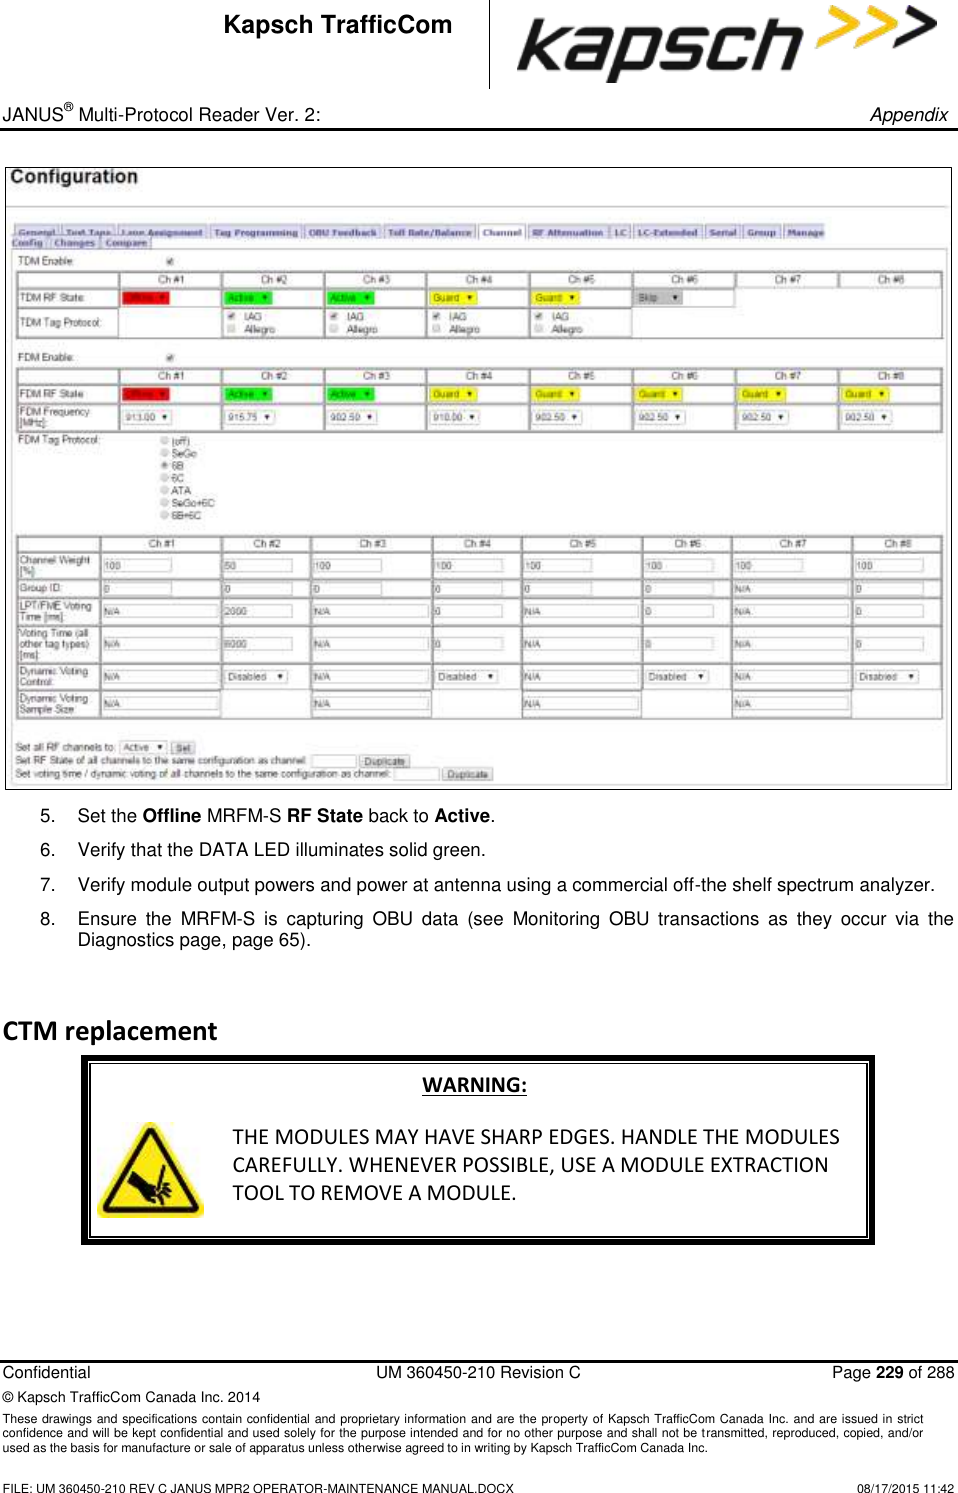 _ JANUS® Multi-Protocol Reader Ver. 2:       Appendix   Confidential  UM 360450-210 Revision C  Page 229 of 288 © Kapsch TrafficCom Canada Inc. 2014 These drawings and specifications contain confidential and proprietary information and are the property of Kapsch TrafficCom Canada Inc. and are issued in strict confidence and will be kept confidential and used solely for the purpose intended and for no other purpose and shall not be transmitted, reproduced, copied, and/or used as the basis for manufacture or sale of apparatus unless otherwise agreed to in writing by Kapsch TrafficCom Canada Inc.    FILE: UM 360450-210 REV C JANUS MPR2 OPERATOR-MAINTENANCE MANUAL.DOCX   08/17/2015 11:42 Kapsch TrafficCom  5.  Set the Offline MRFM-S RF State back to Active.  6.  Verify that the DATA LED illuminates solid green.  7.  Verify module output powers and power at antenna using a commercial off-the shelf spectrum analyzer. 8.  Ensure  the  MRFM-S  is  capturing  OBU  data  (see  Monitoring  OBU  transactions  as  they  occur  via  the Diagnostics page, page 65). CTM replacement WARNING:  THE MODULES MAY HAVE SHARP EDGES. HANDLE THE MODULES CAREFULLY. WHENEVER POSSIBLE, USE A MODULE EXTRACTION TOOL TO REMOVE A MODULE.  